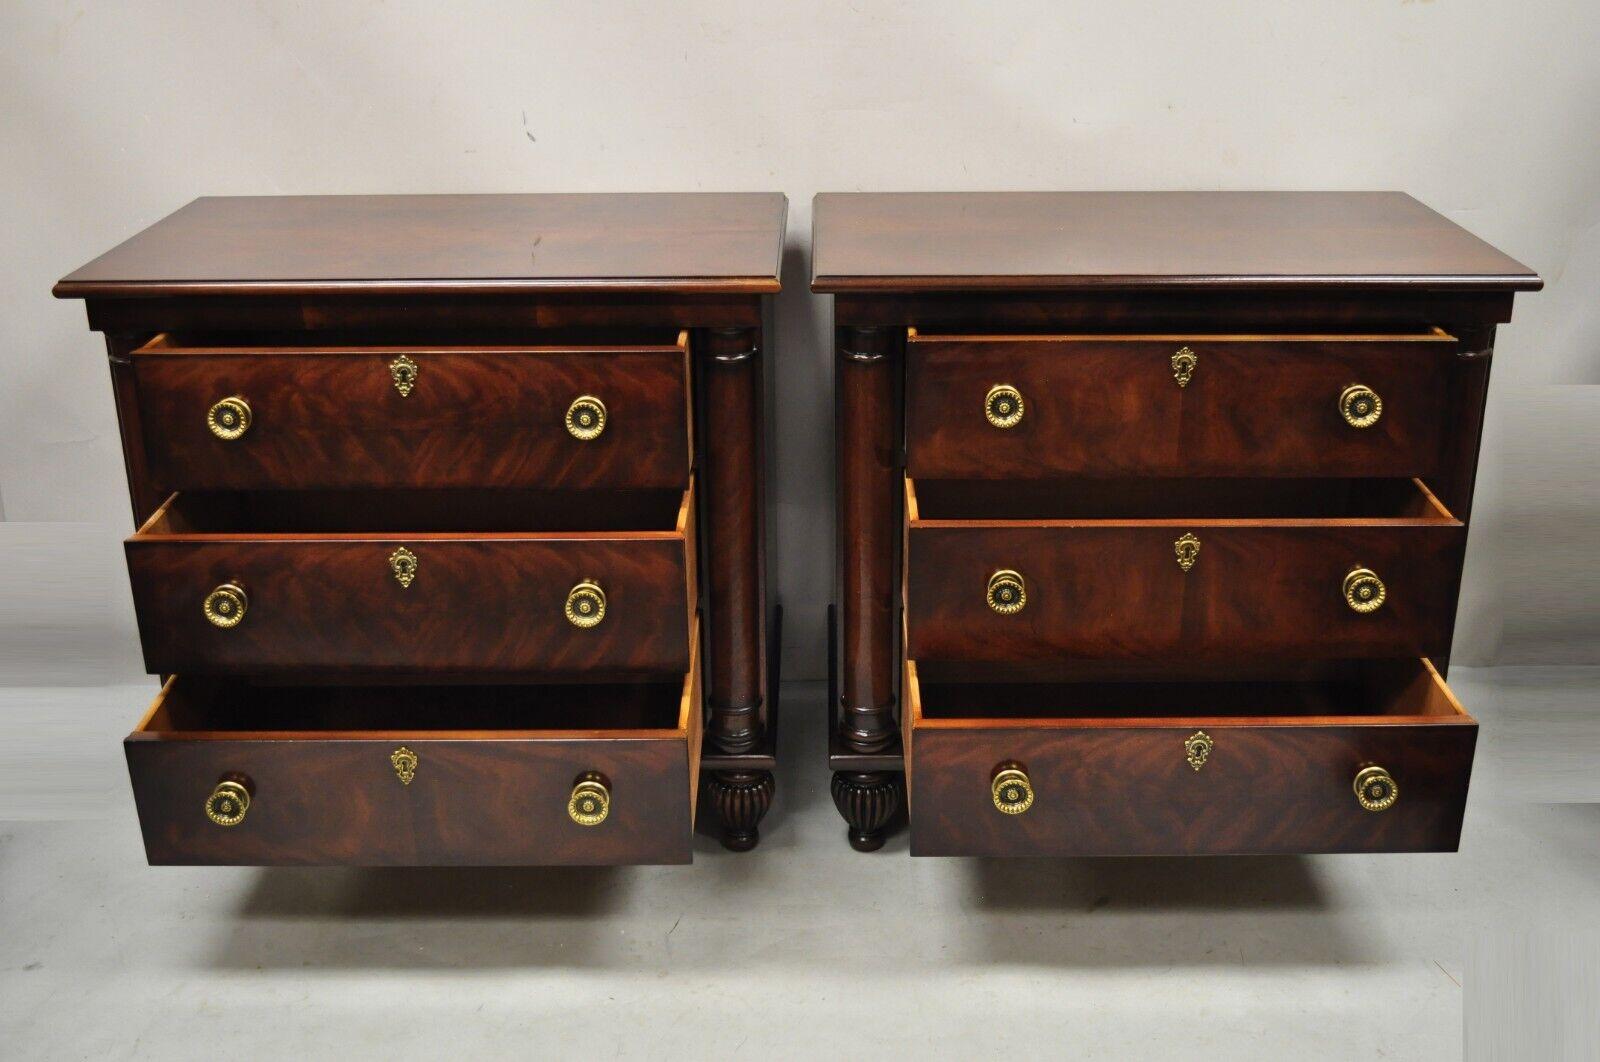 Henredon French Empire neoclassical style Mahogany 3 drawer nightstands - a pair. Item features carved bun feet, solid wood construction, beautiful woodgrain, original labels, 3 dovetailed drawers, solid brass hardware, quality American